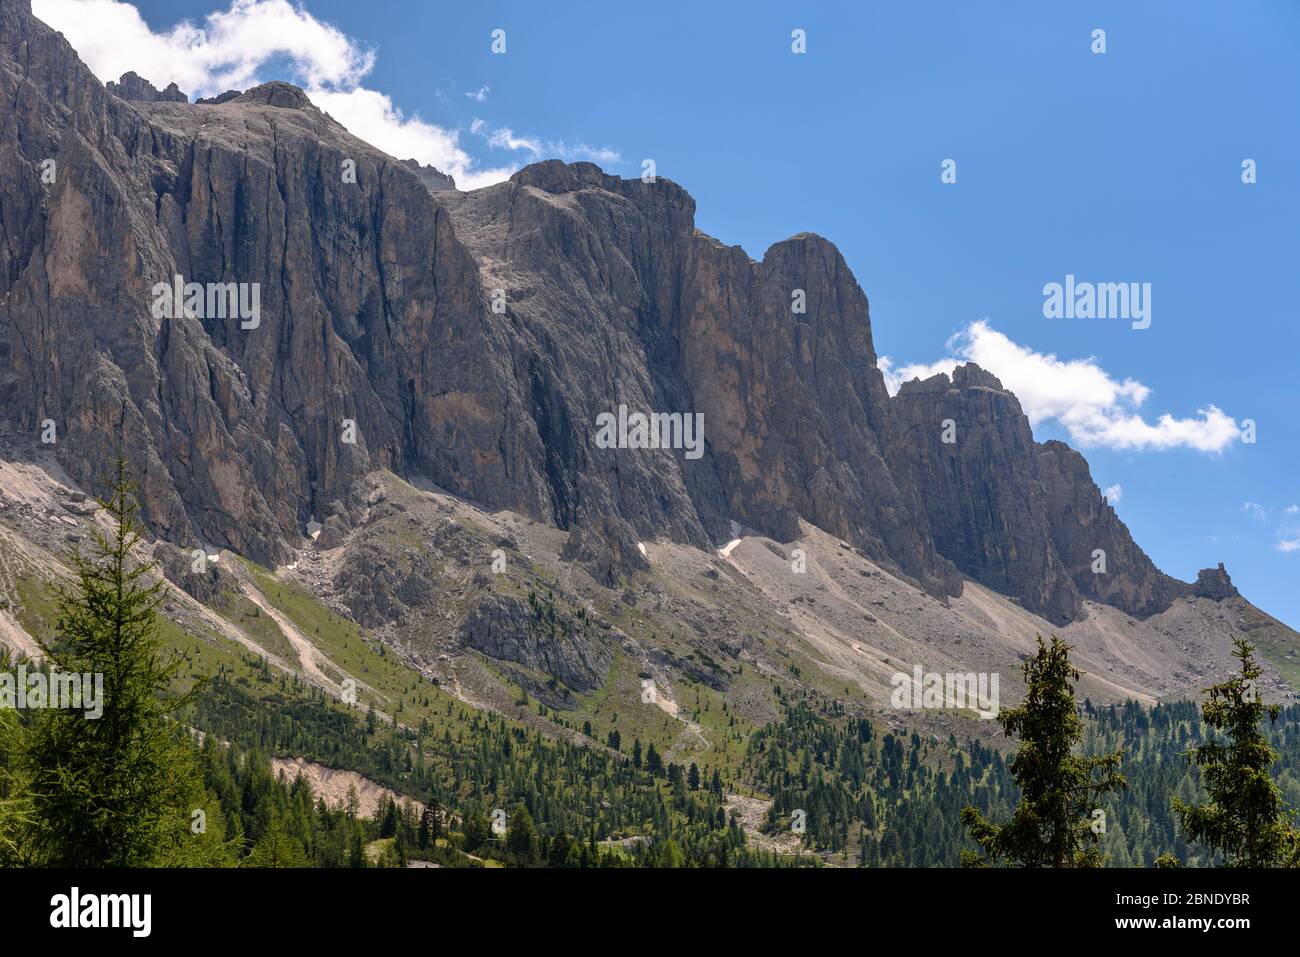 The western slope of the Sella Massif Stock Photo